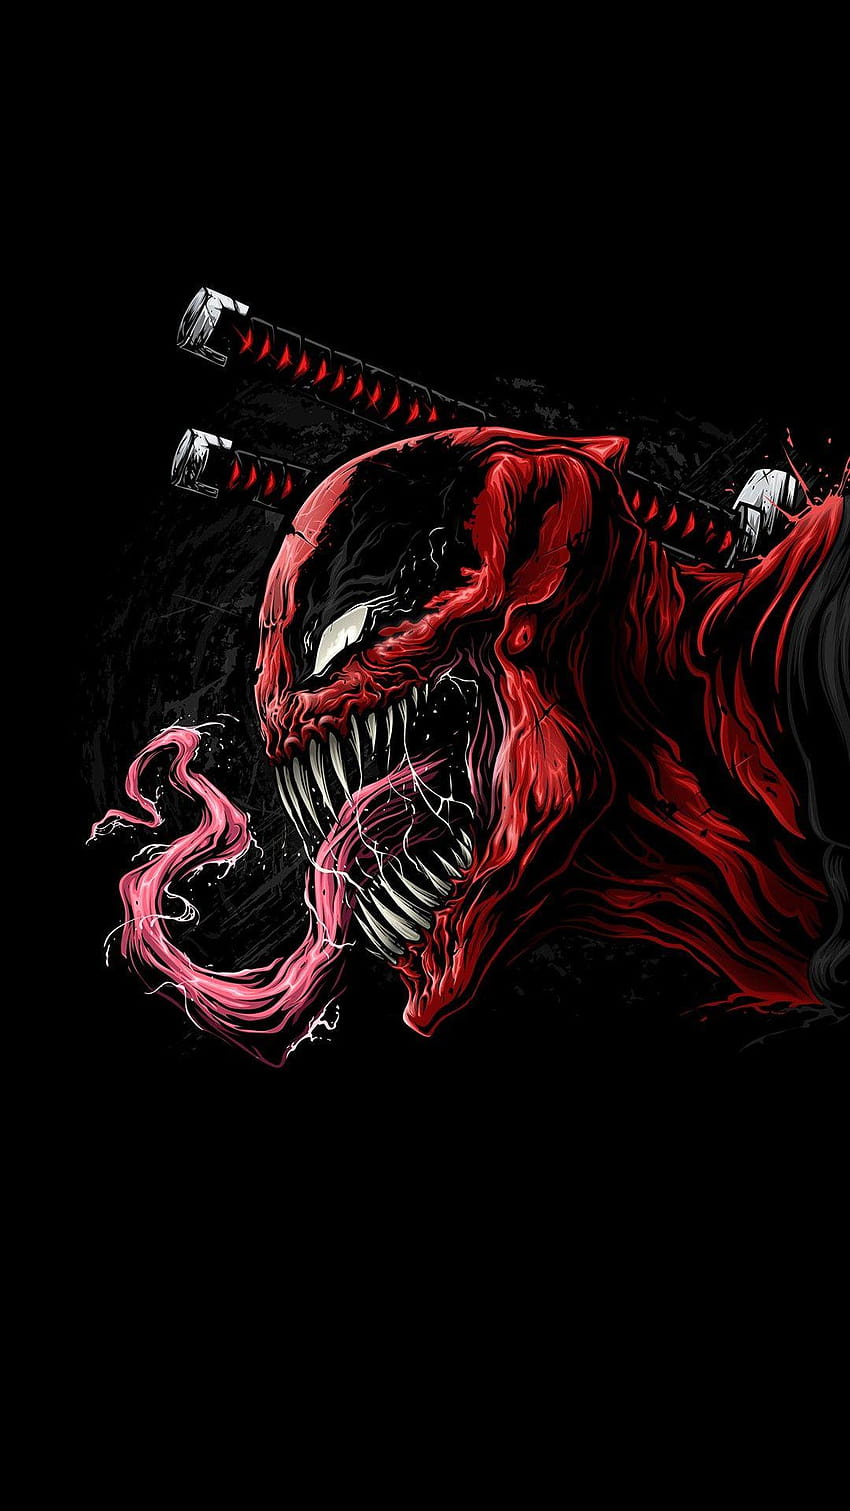 Made By Counterpoint Magazine, venom amoled HD phone wallpaper